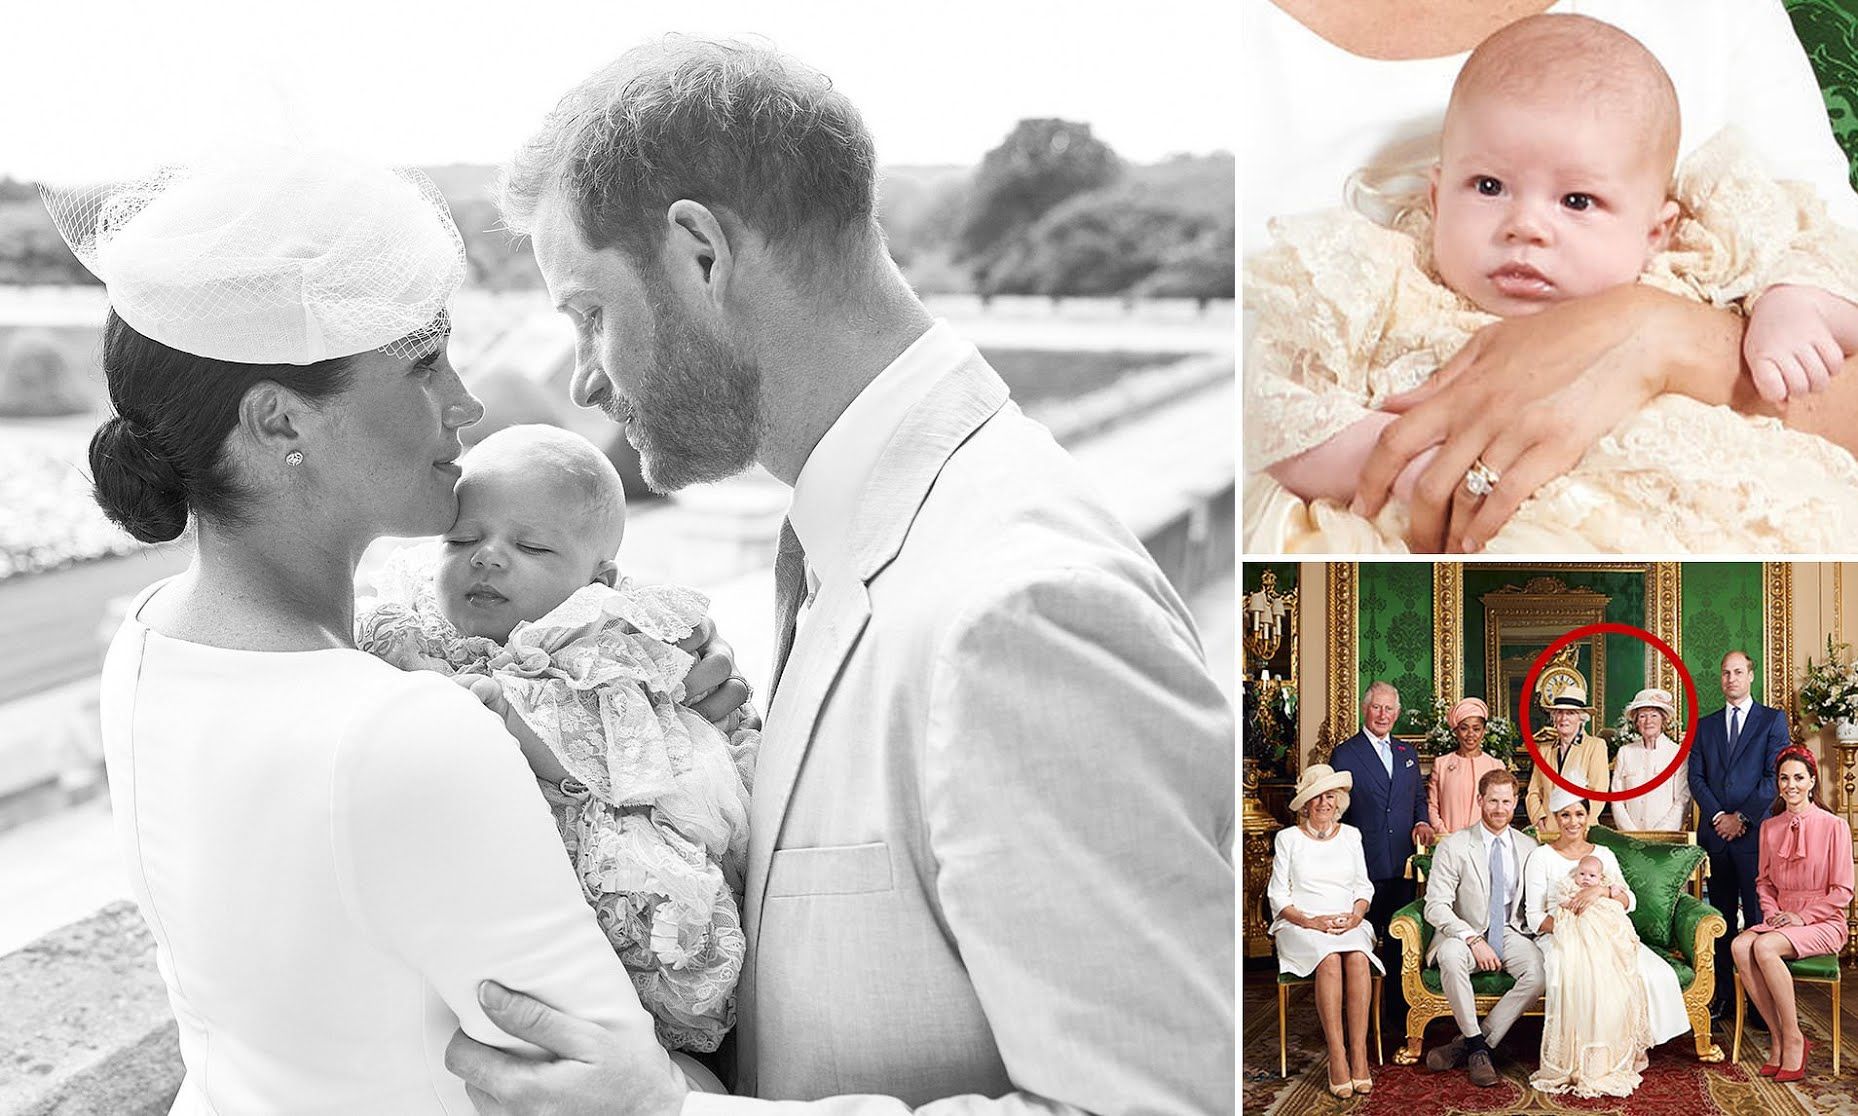 Could This Baptism Headpiece Be The Next Big Trend: 7 Surprising And Beautiful Styles You